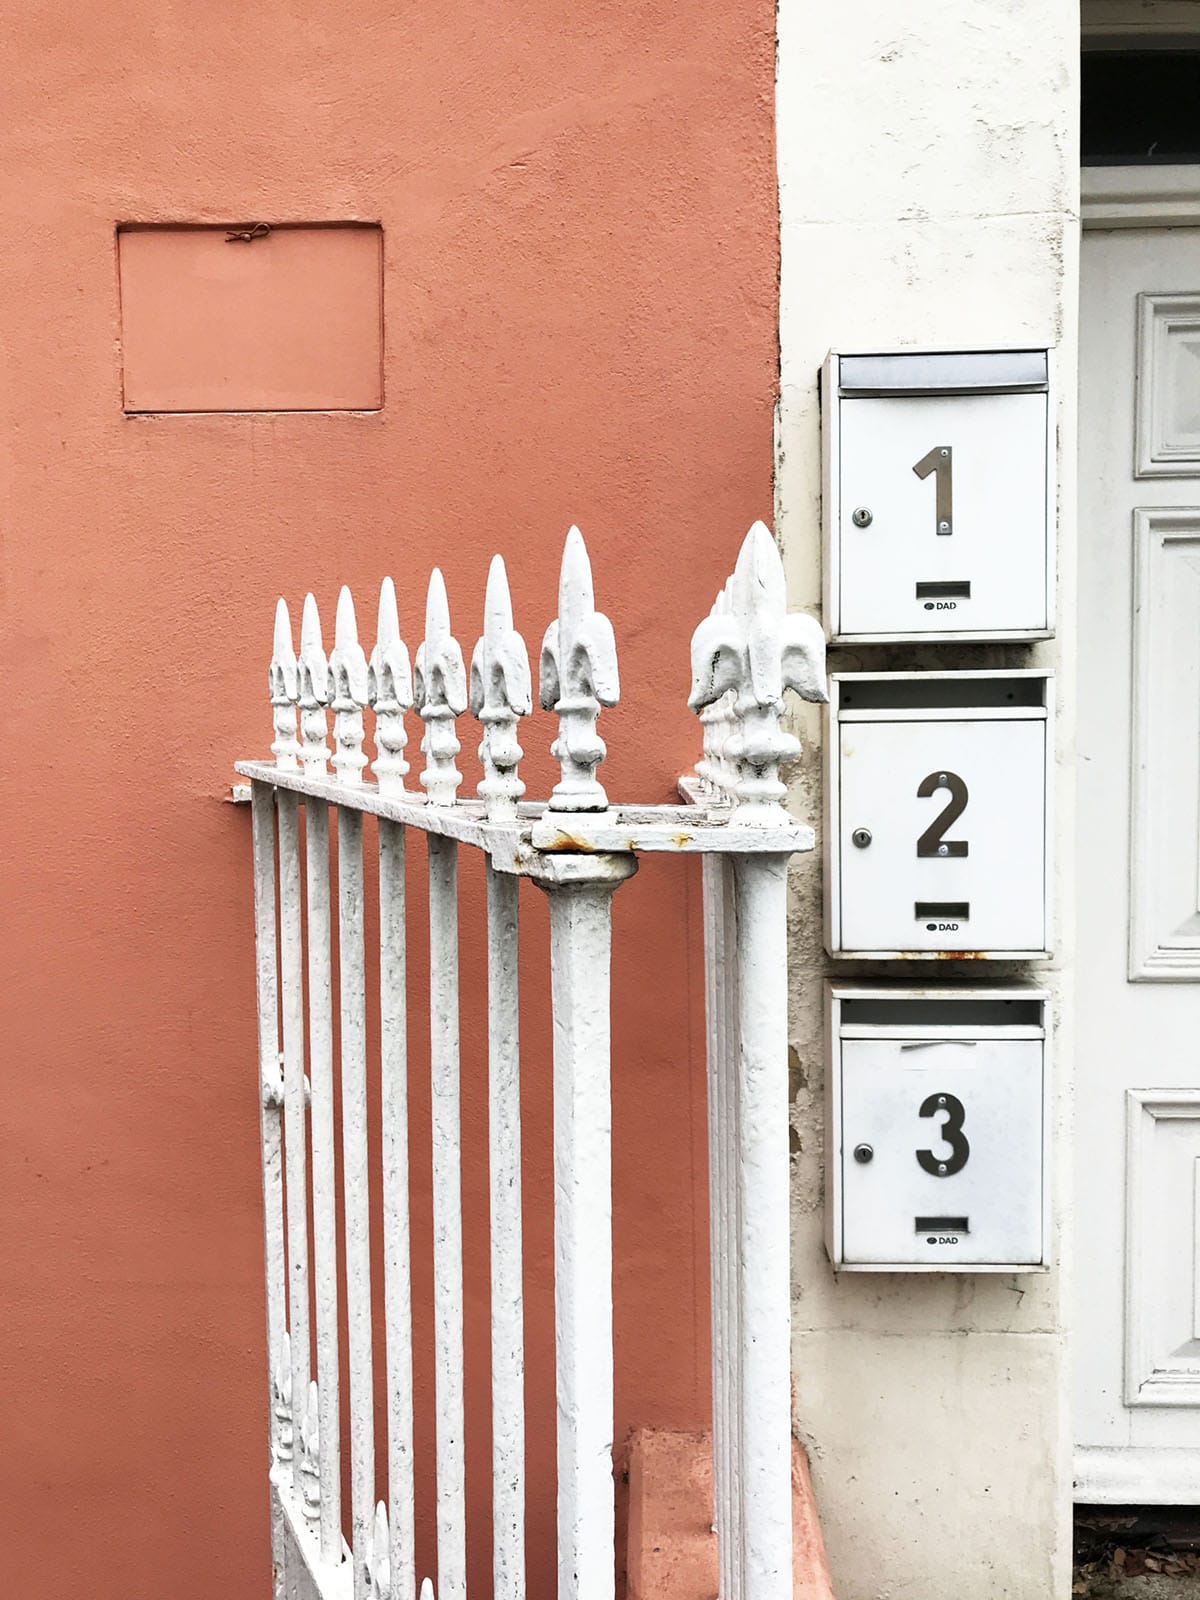 salmon walls and mailbox details on a home in st peters port | guernsey travel guide